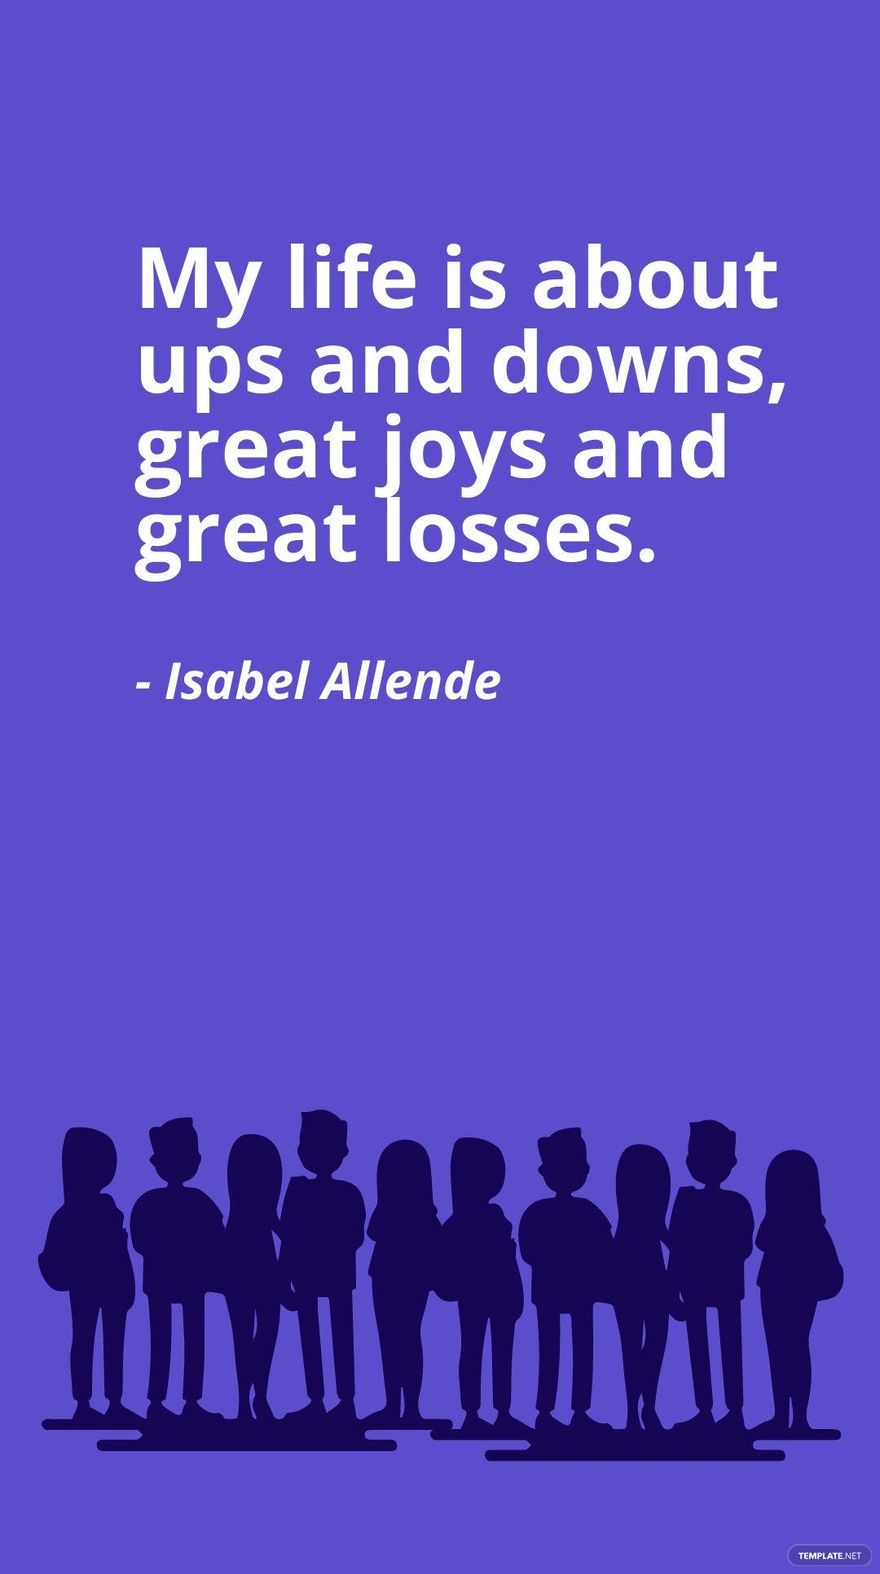 isabel-allende-moving-on-quotes